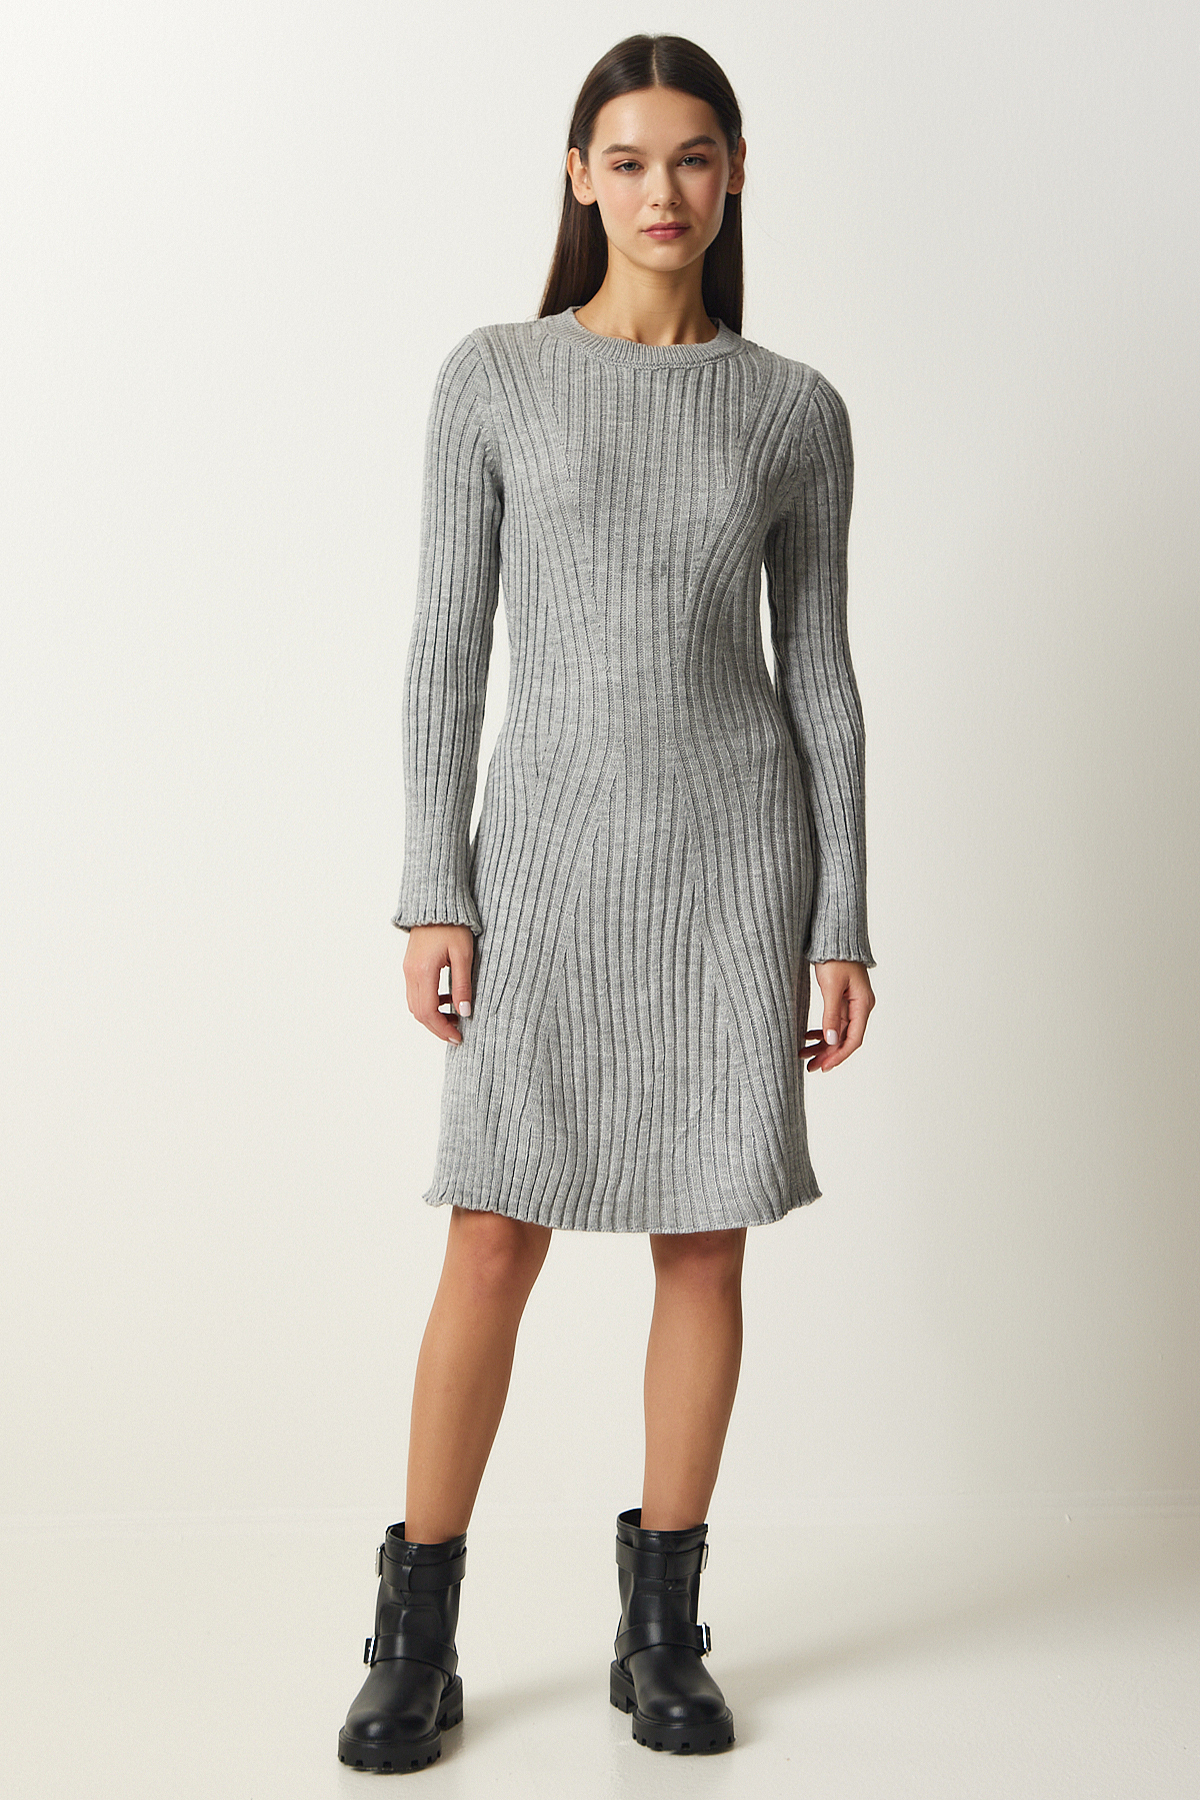 Levně Happiness İstanbul Women's Gray Ribbed A-Line Knitwear Dress